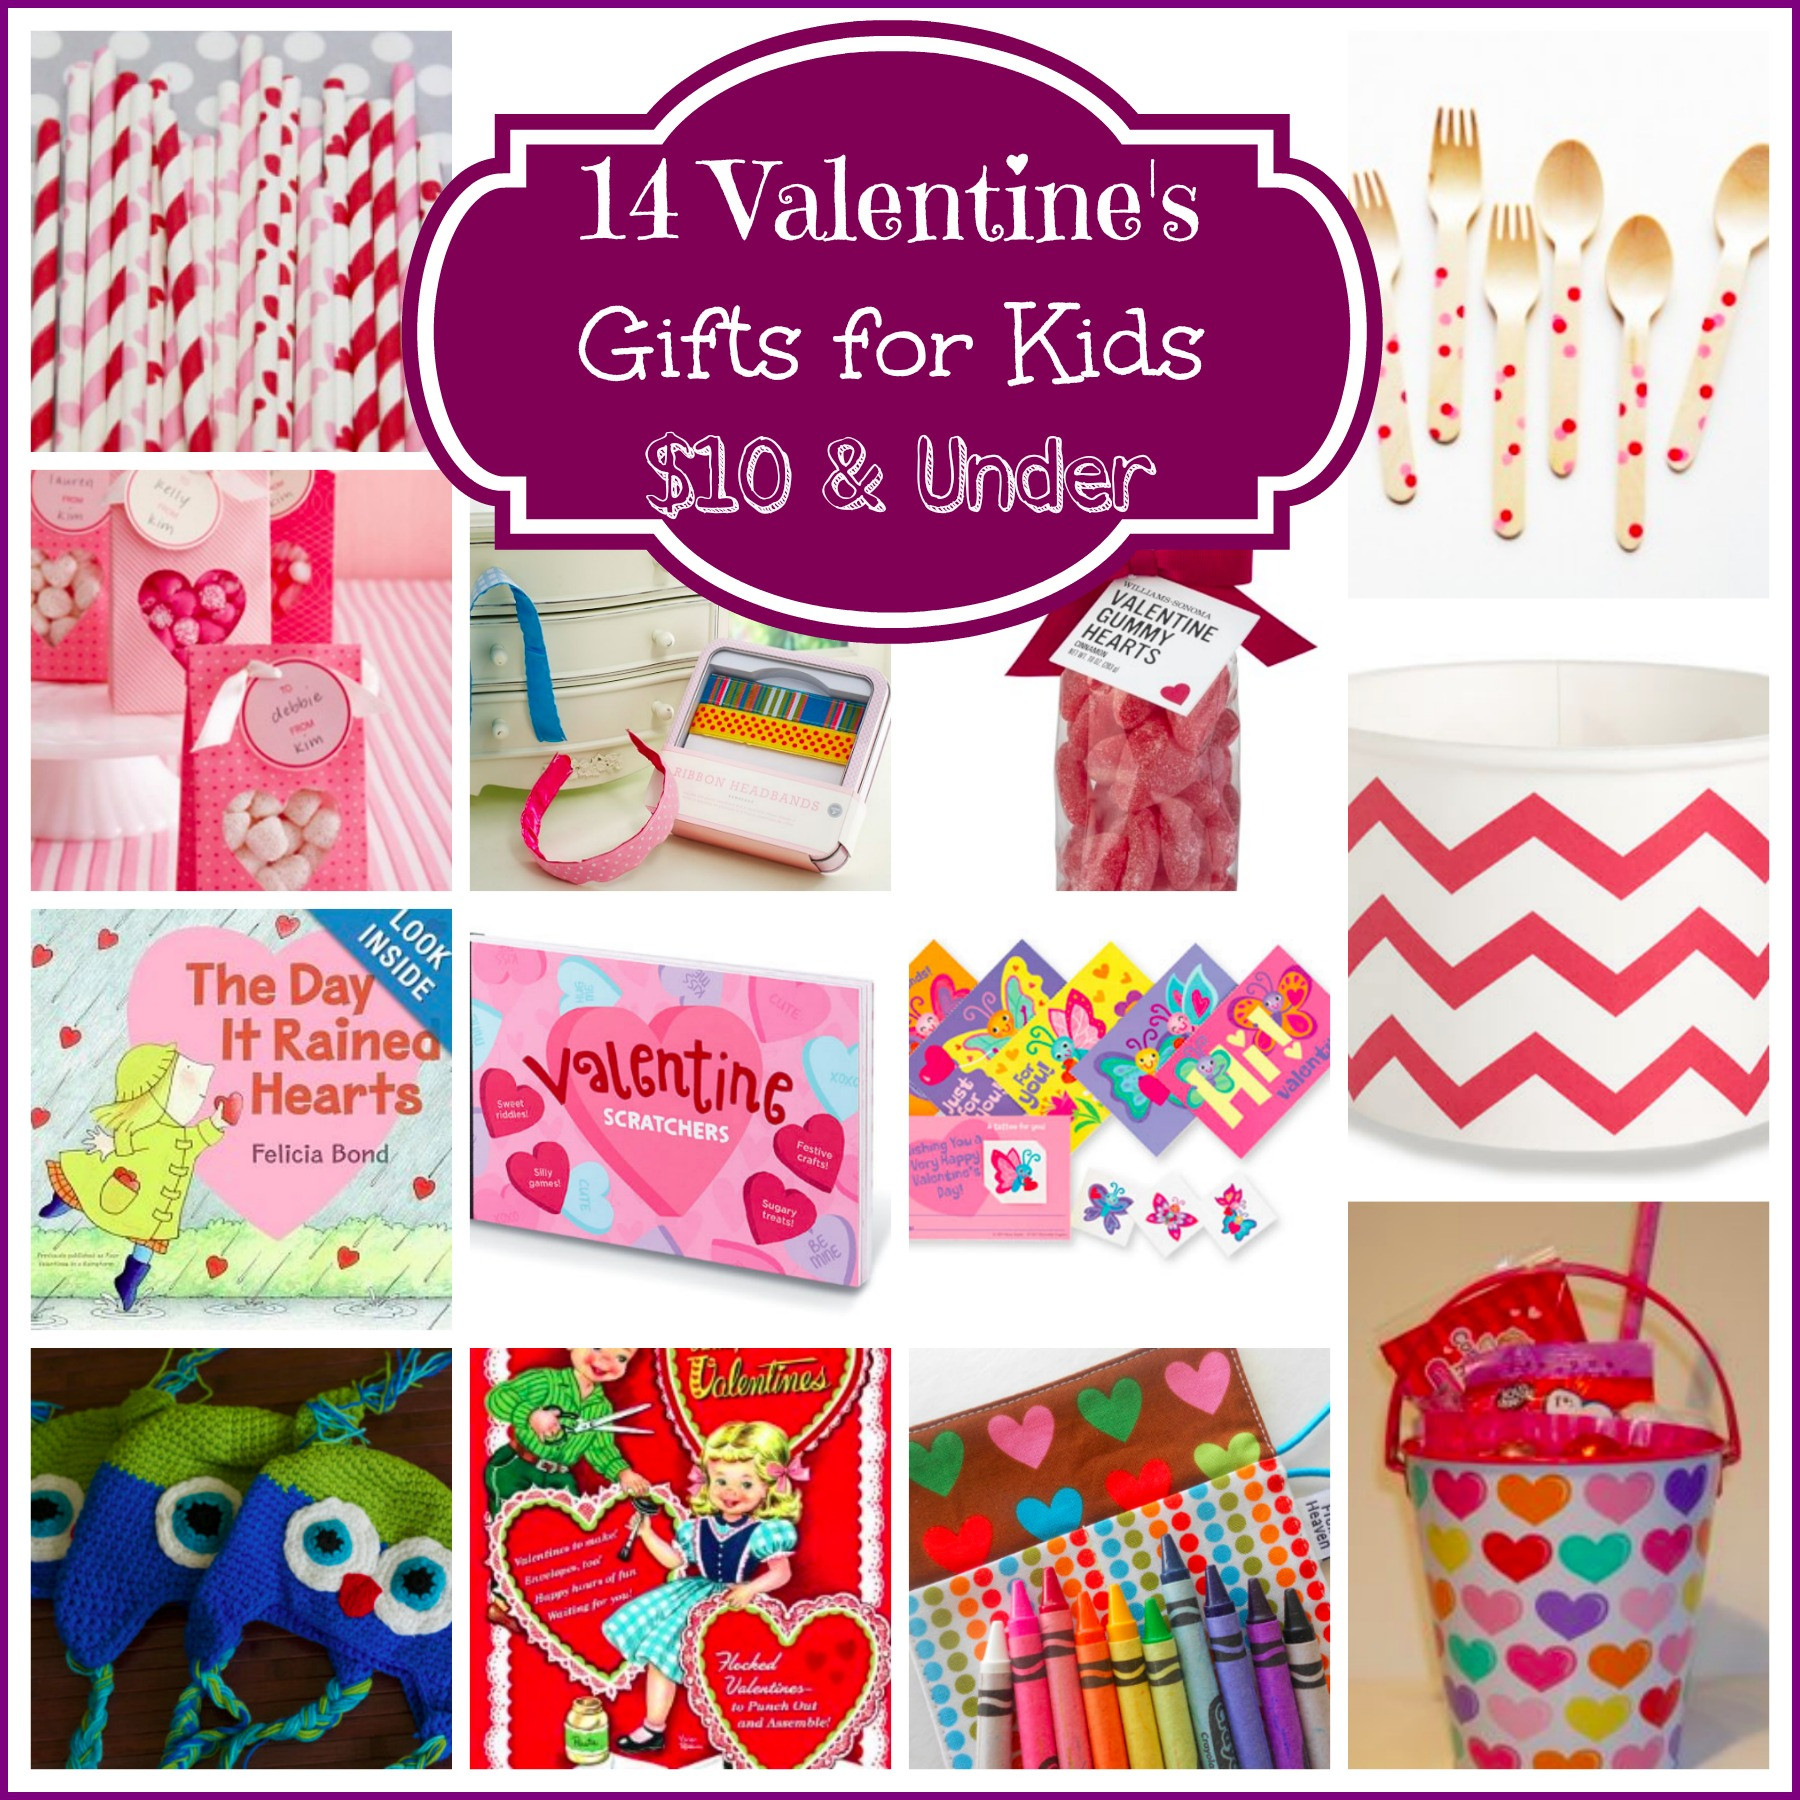 Best Valentines Gifts For Kids
 14 Valentine’s Day Gifts for Kids $10 & Under